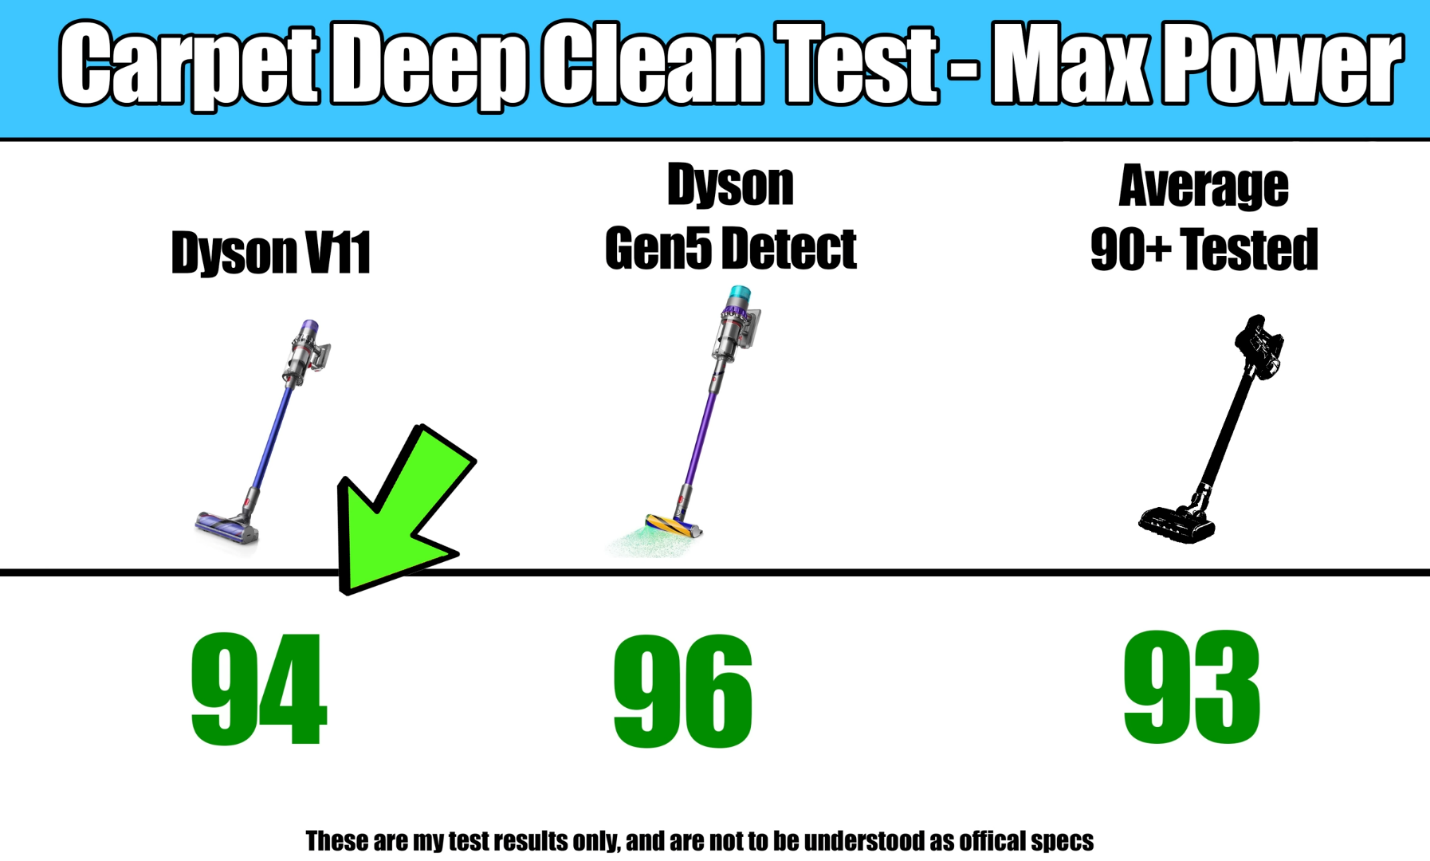 A scorecard showing the Dyson V11 scoring 94, closely following the Dyson Gen5 Detect at 96